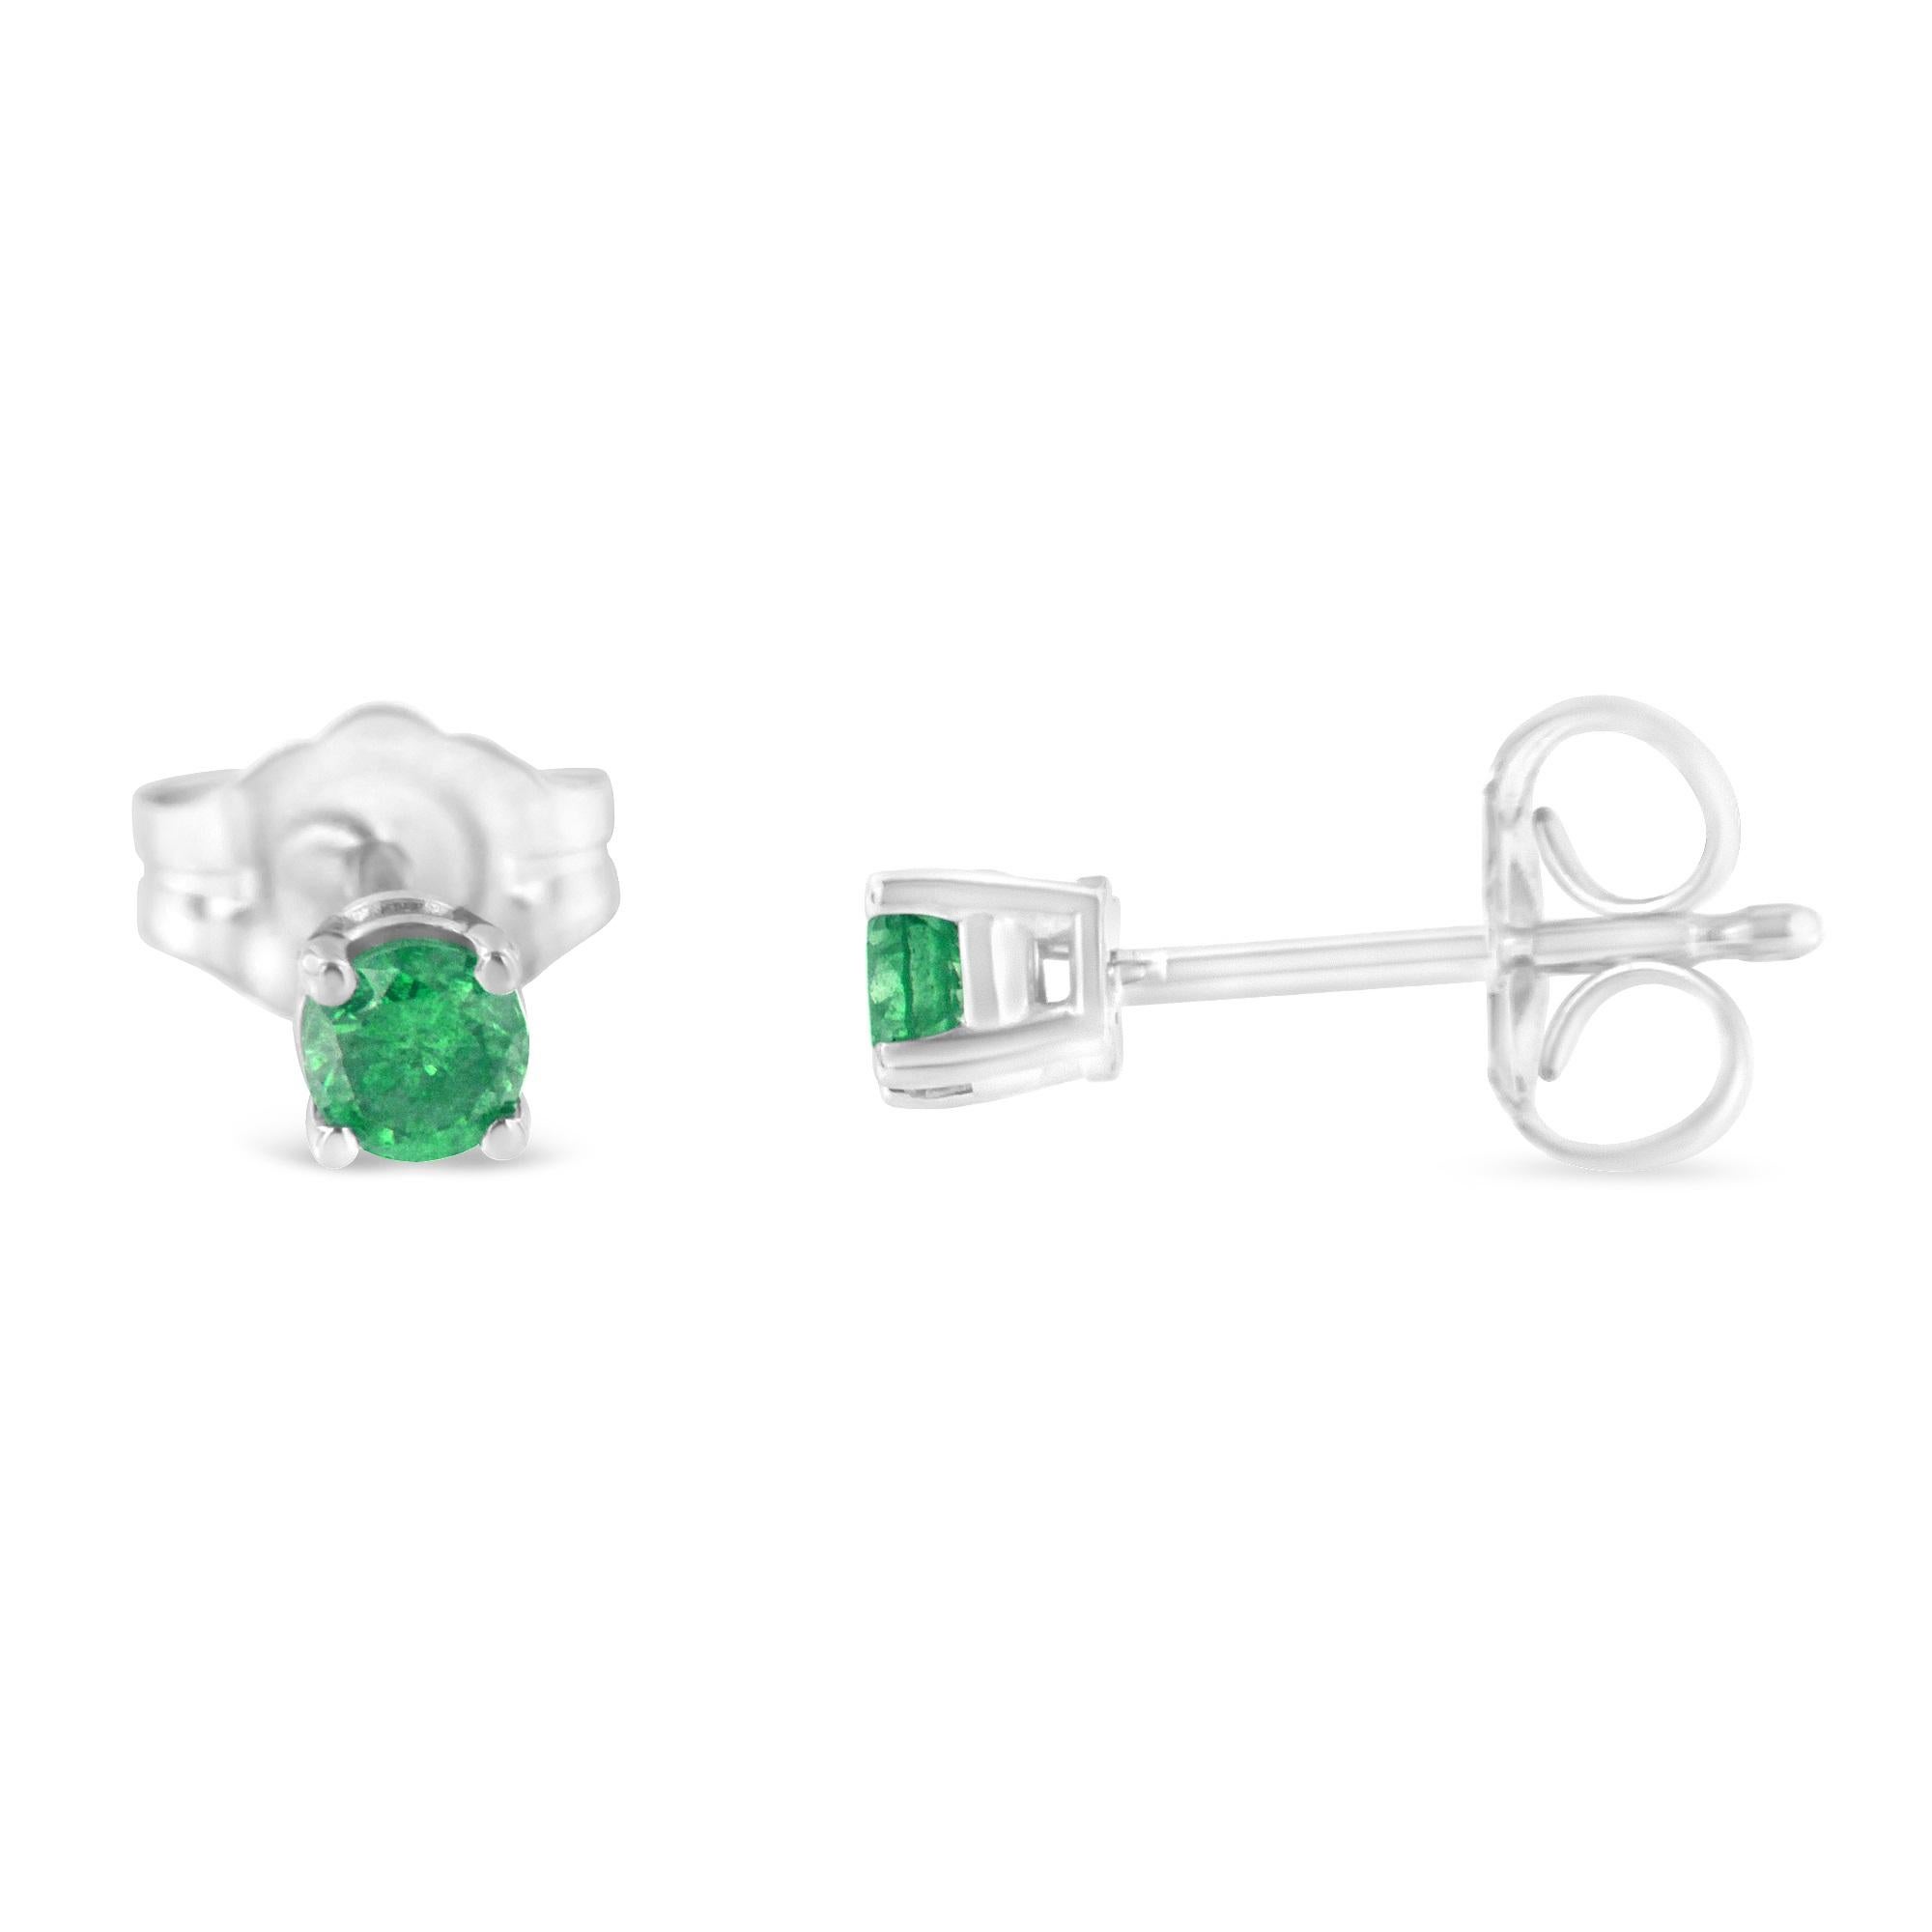 A pair of treated green diamond and sterling silver stud earrings. Each earring features a round diamond set into a .925 quality sterling silver prong setting. The total diamond weight is .25 carats. They are finished with a push back